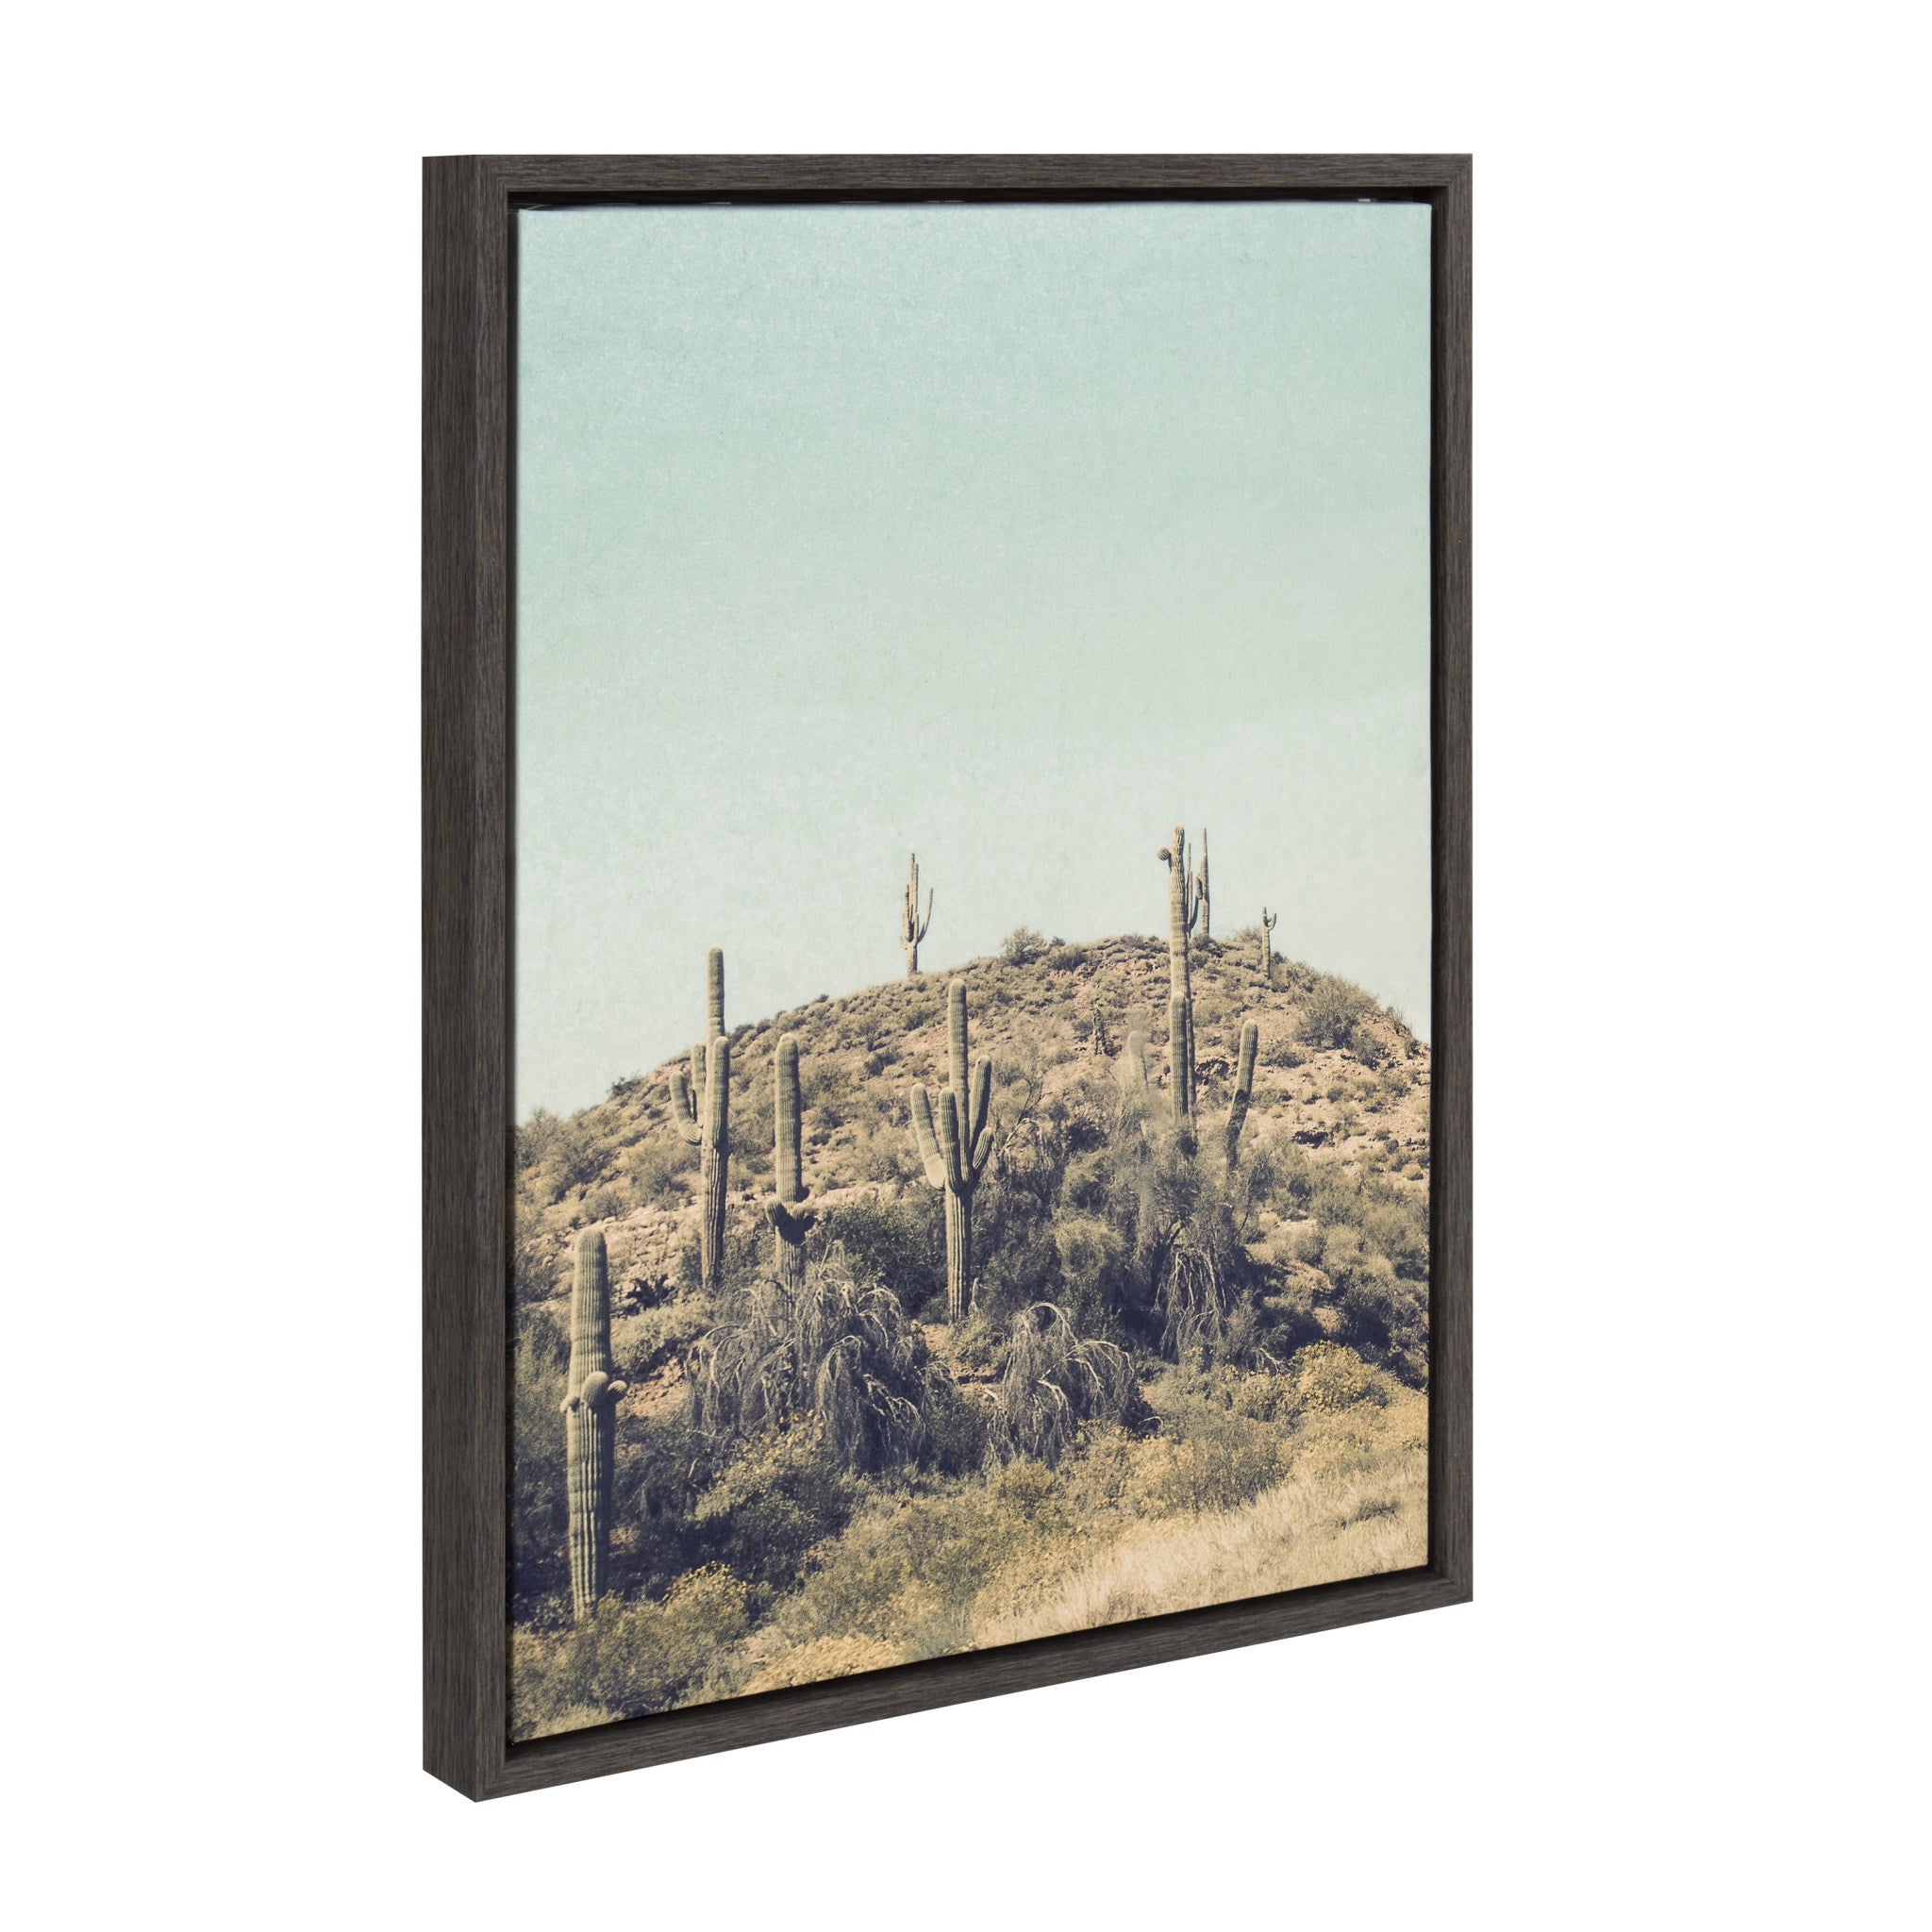 Sylvie Parched Framed Canvas by F2 Images